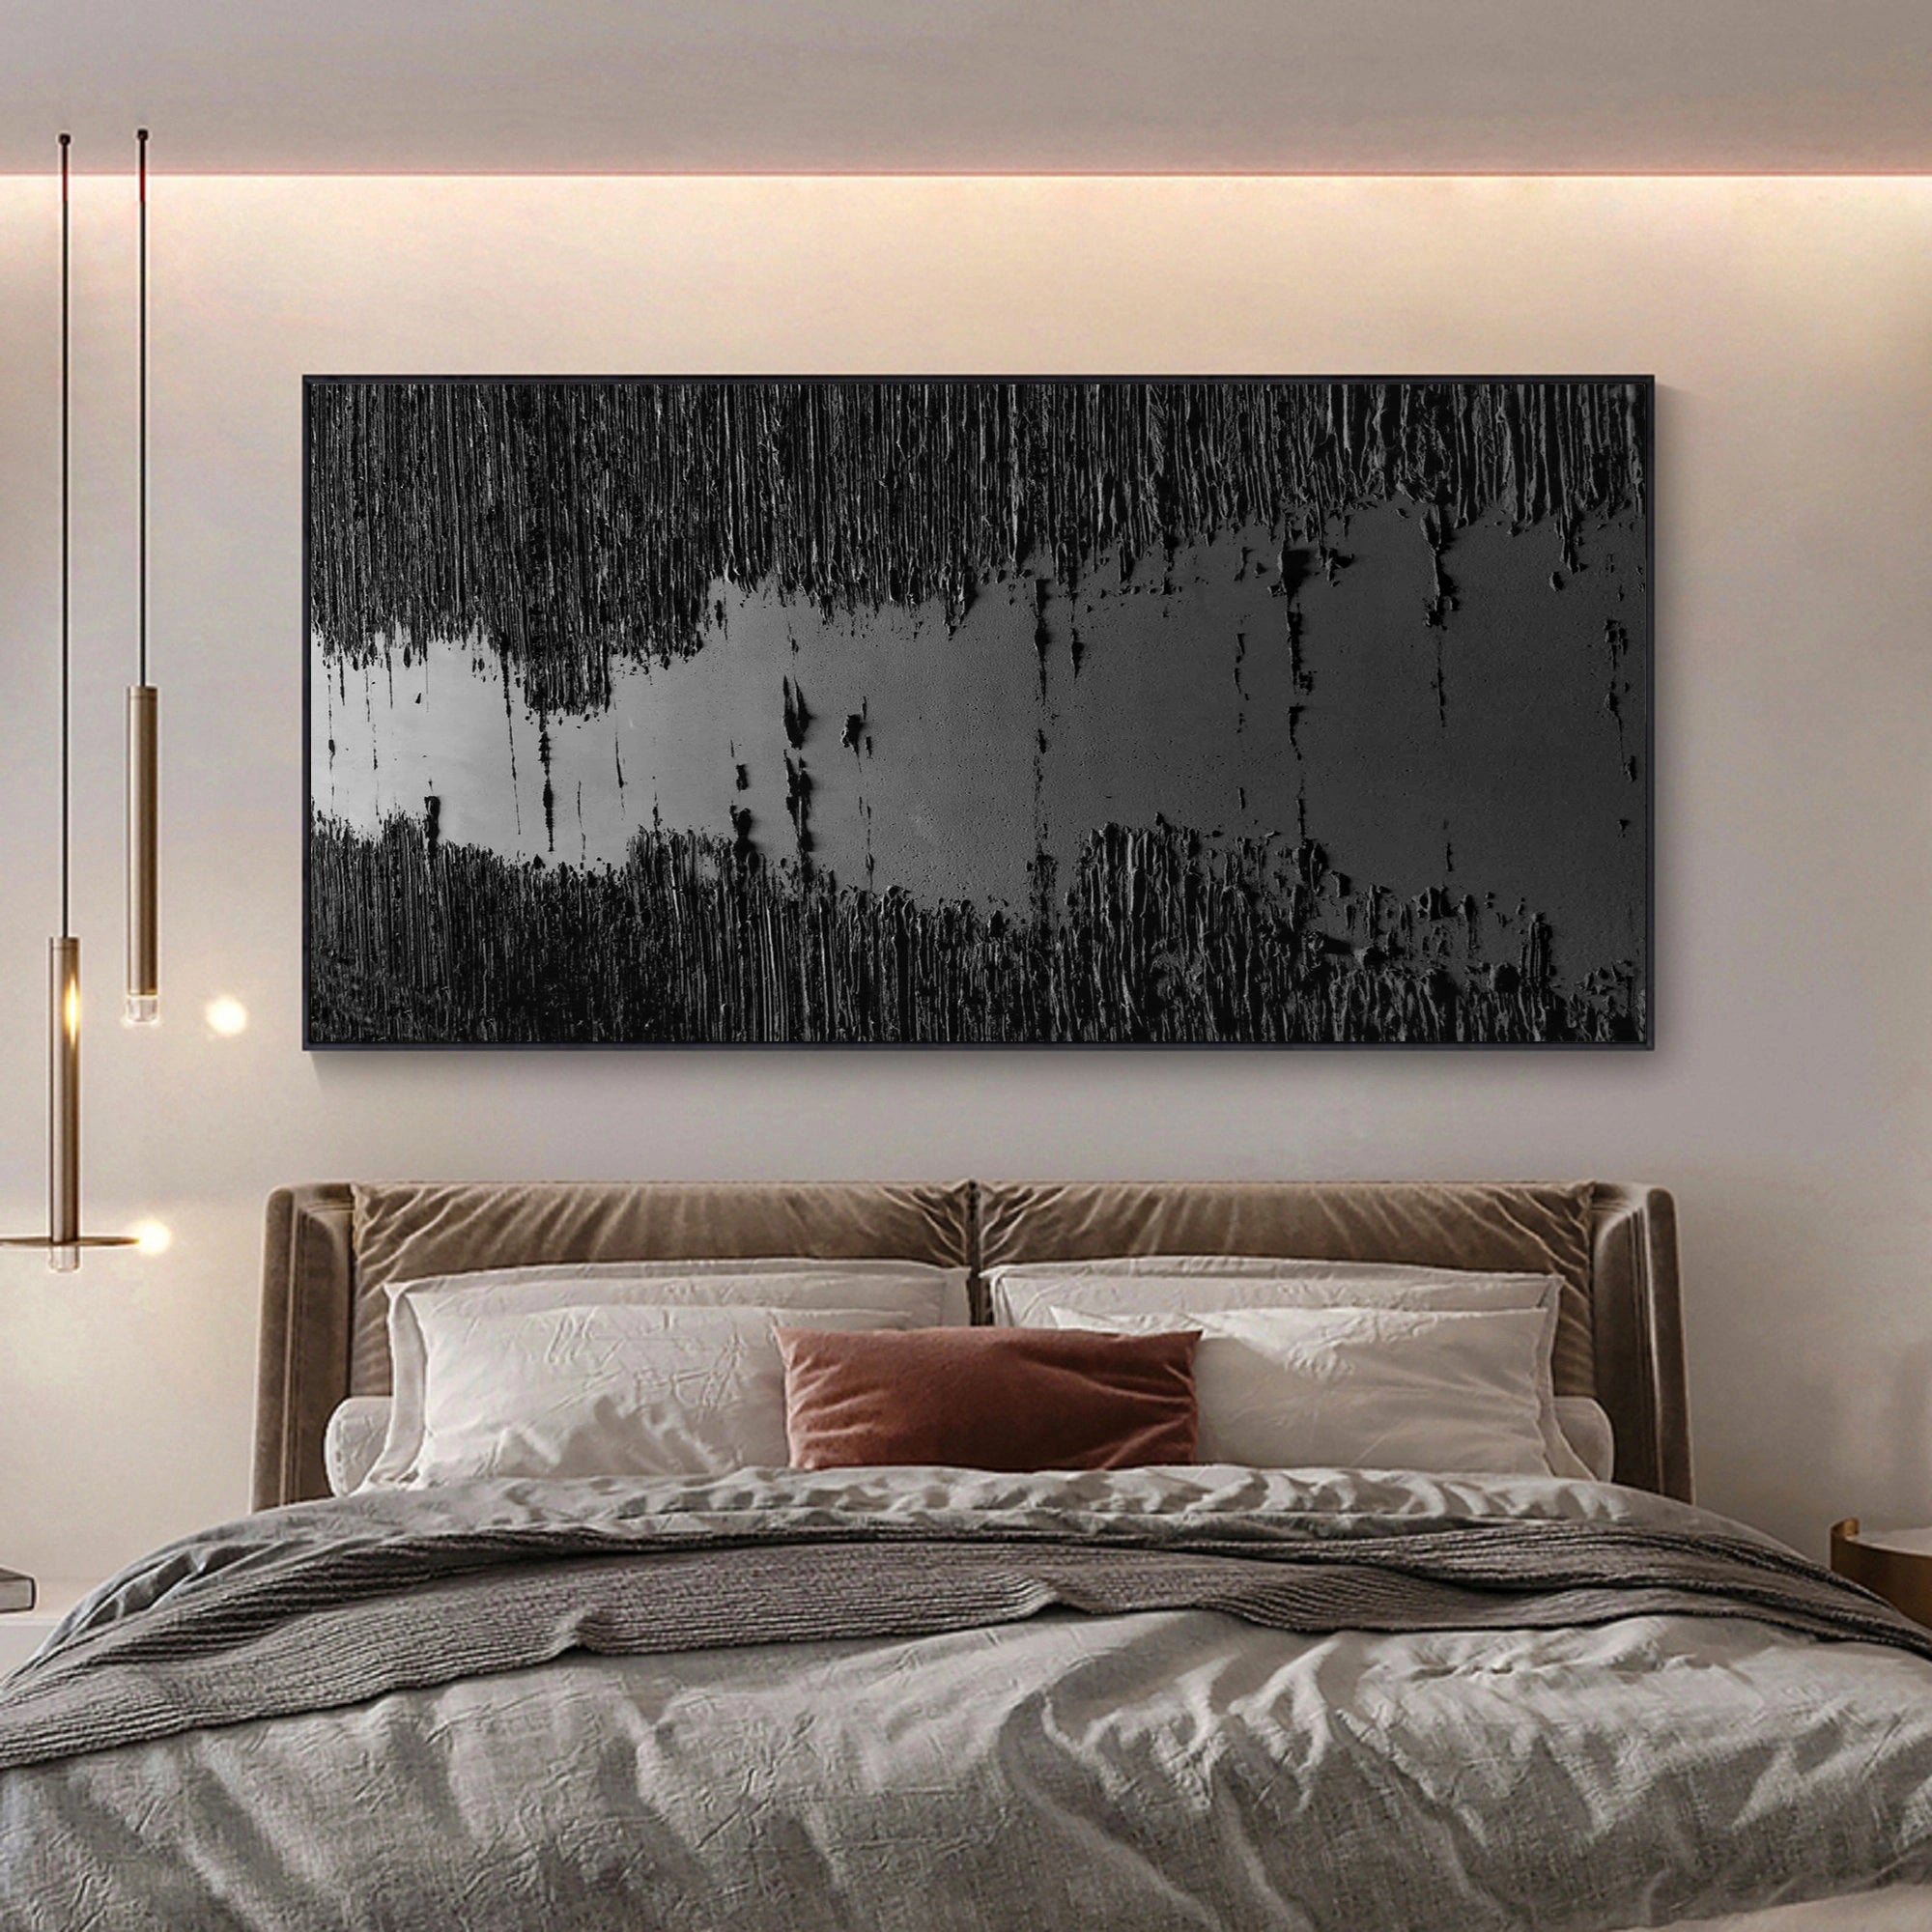 Black 3D Textured River Minimalist Painting on Canvas for Wall Decro